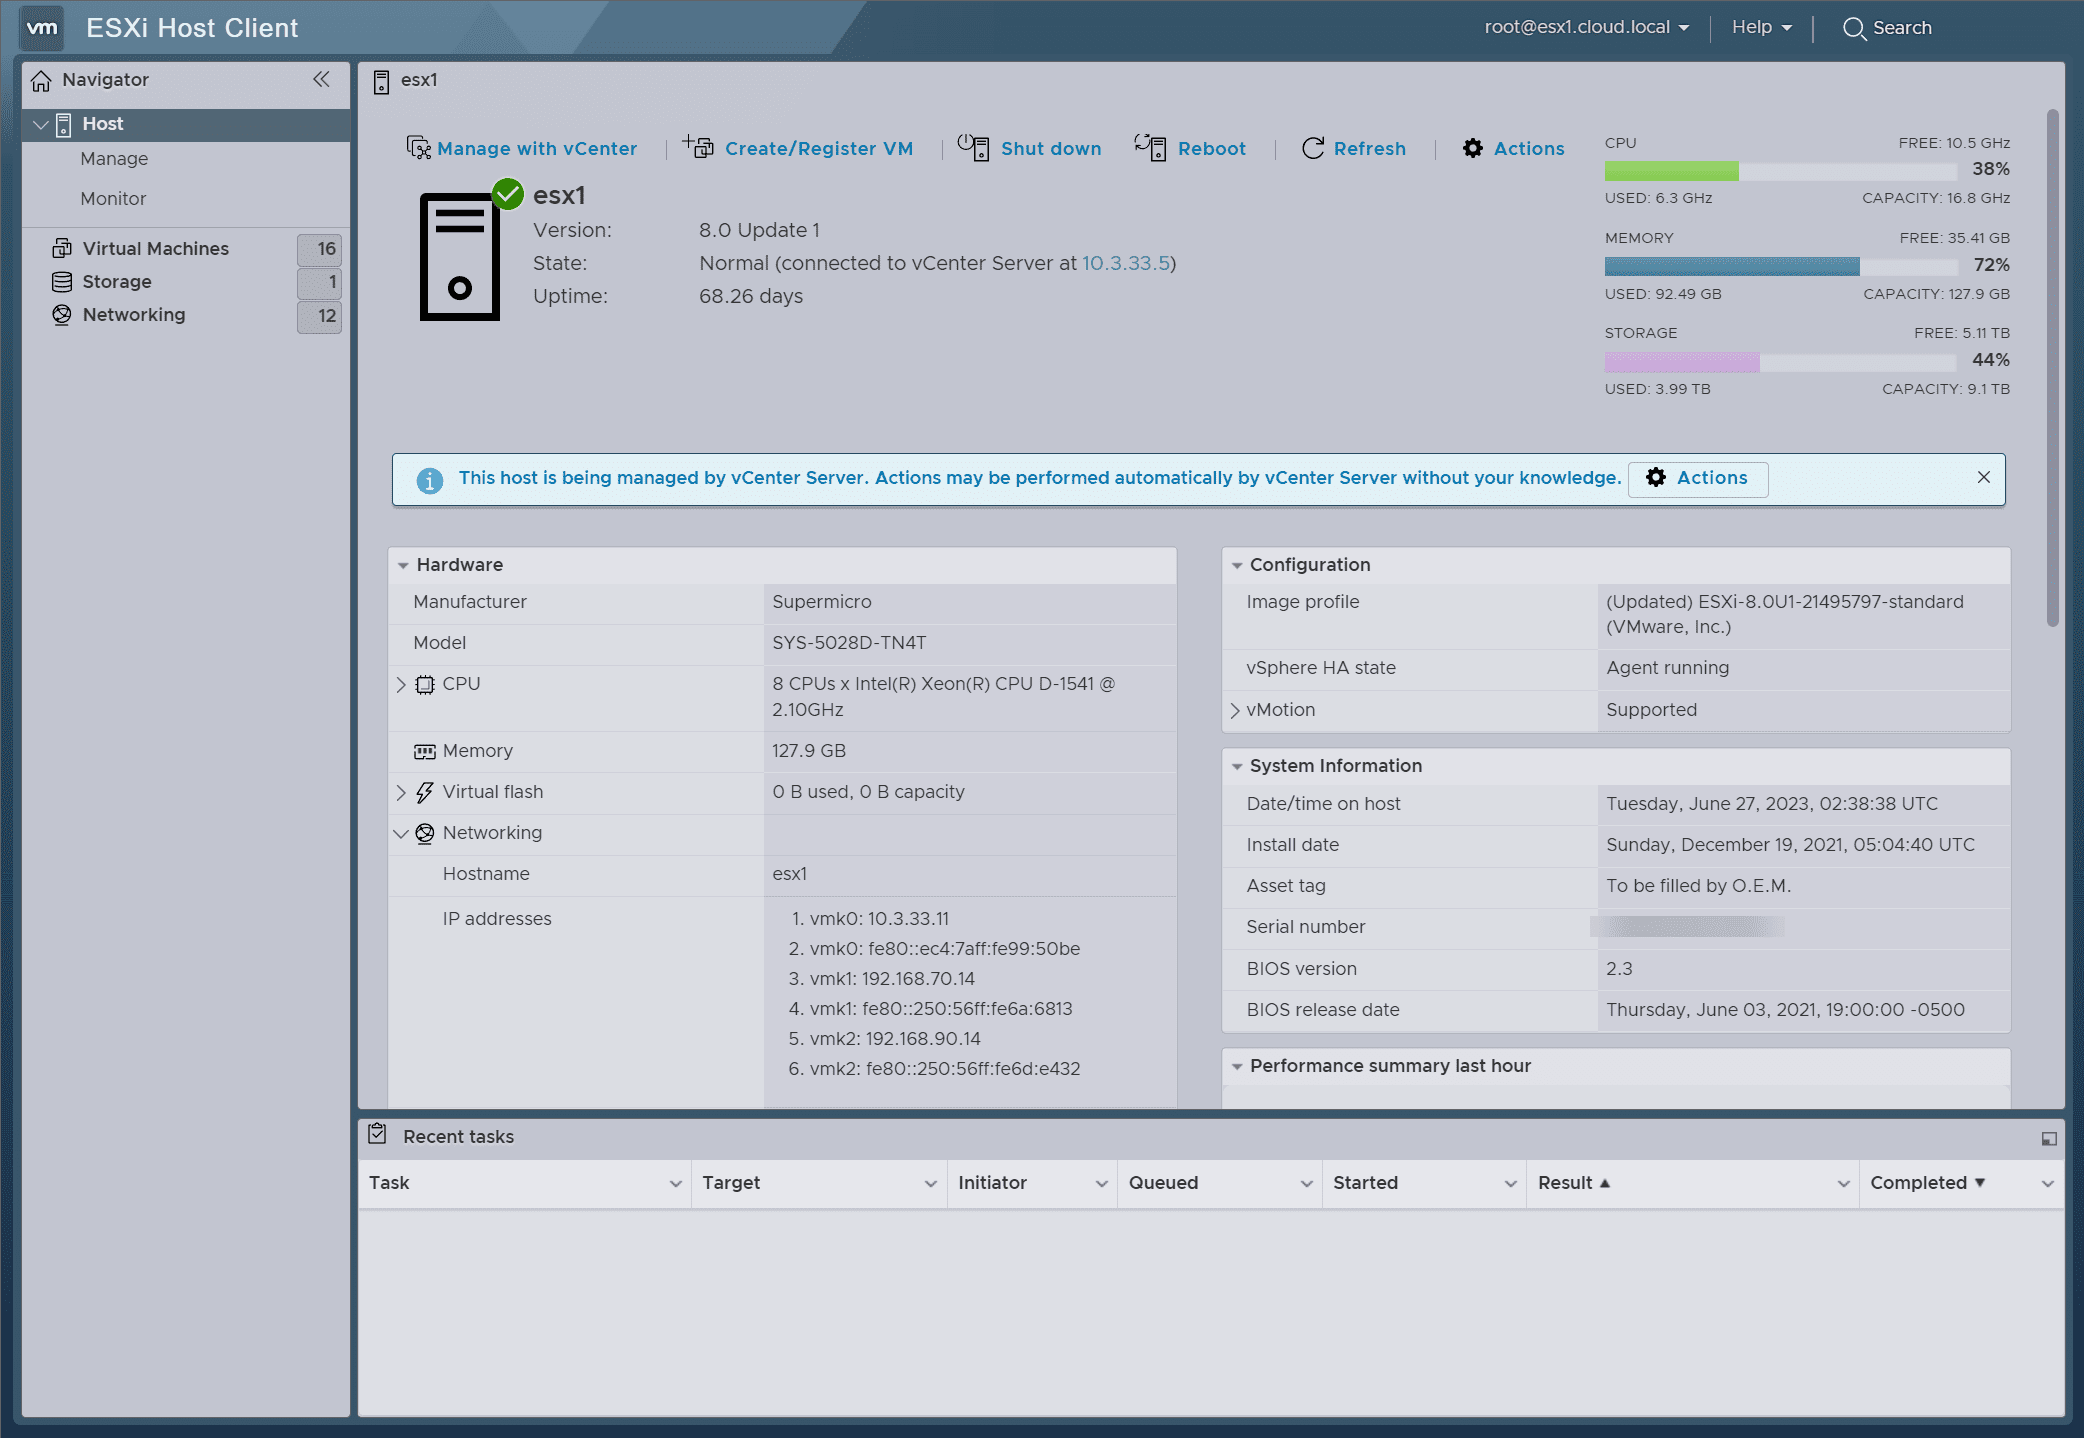 VMware Host Client in ESXi is an excellent interface to manage a standalone host